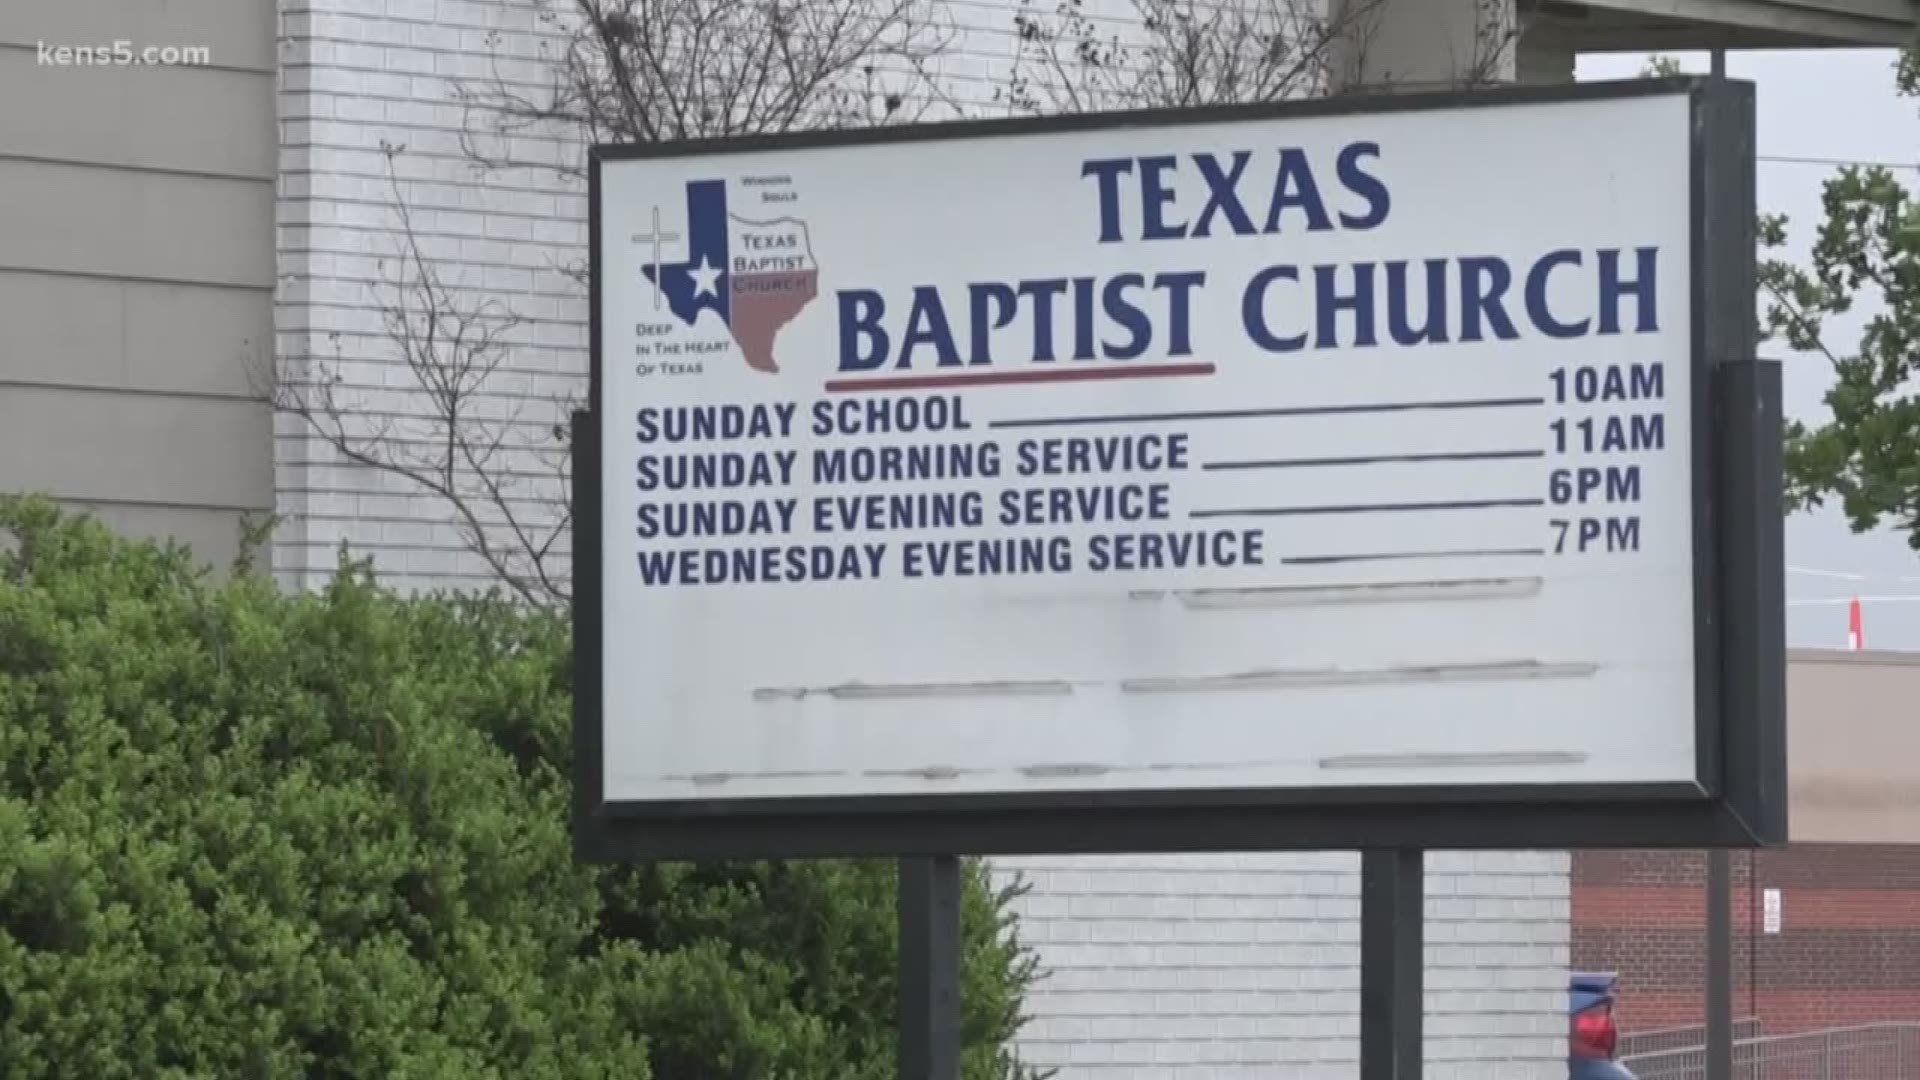 "The church will be open. It will always be open because there's a need," Pastor Keith Bell said.